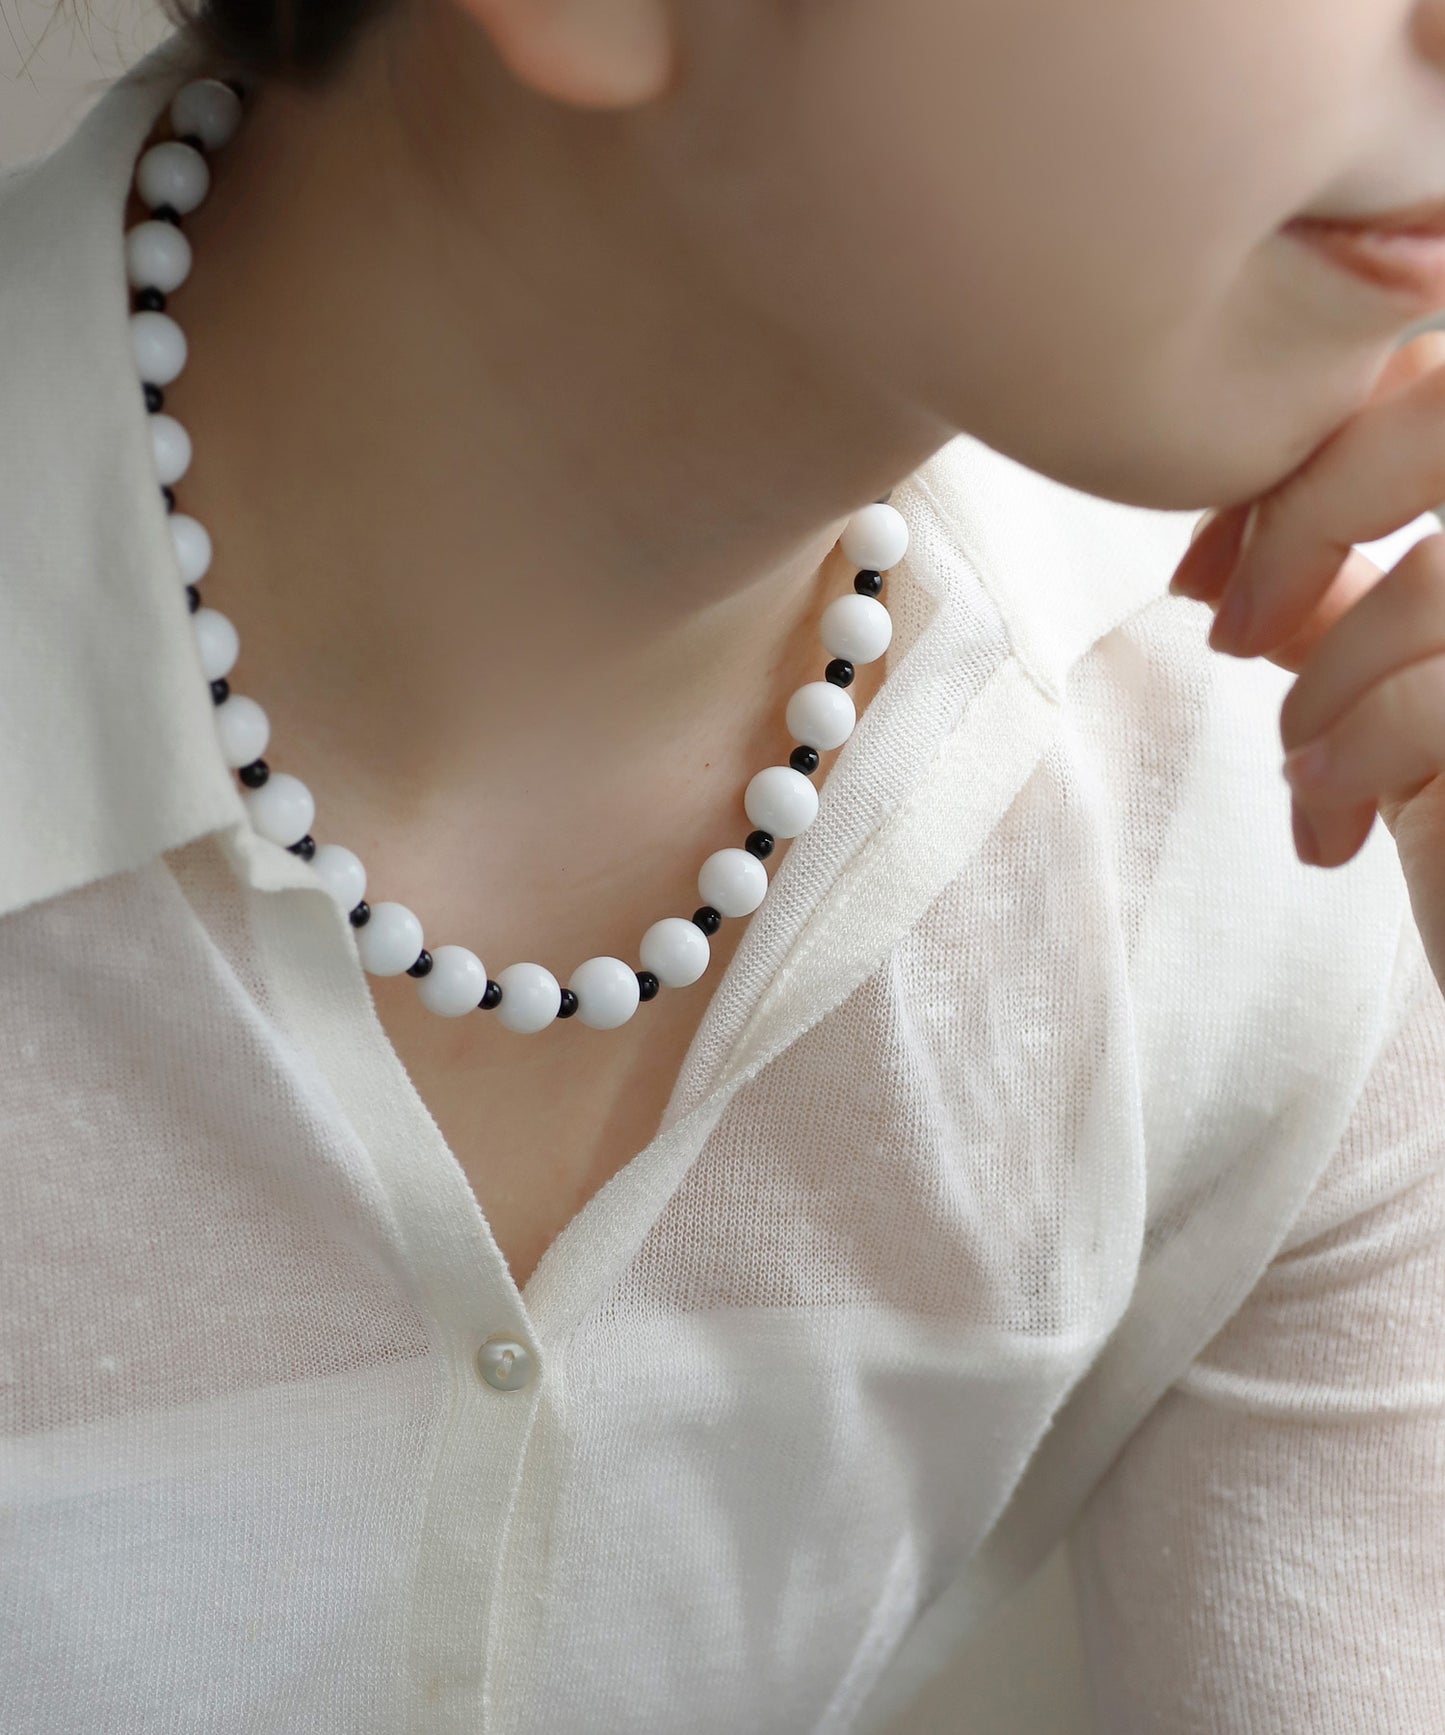 Shell × Onyx Mantel Necklace[BK×WH]